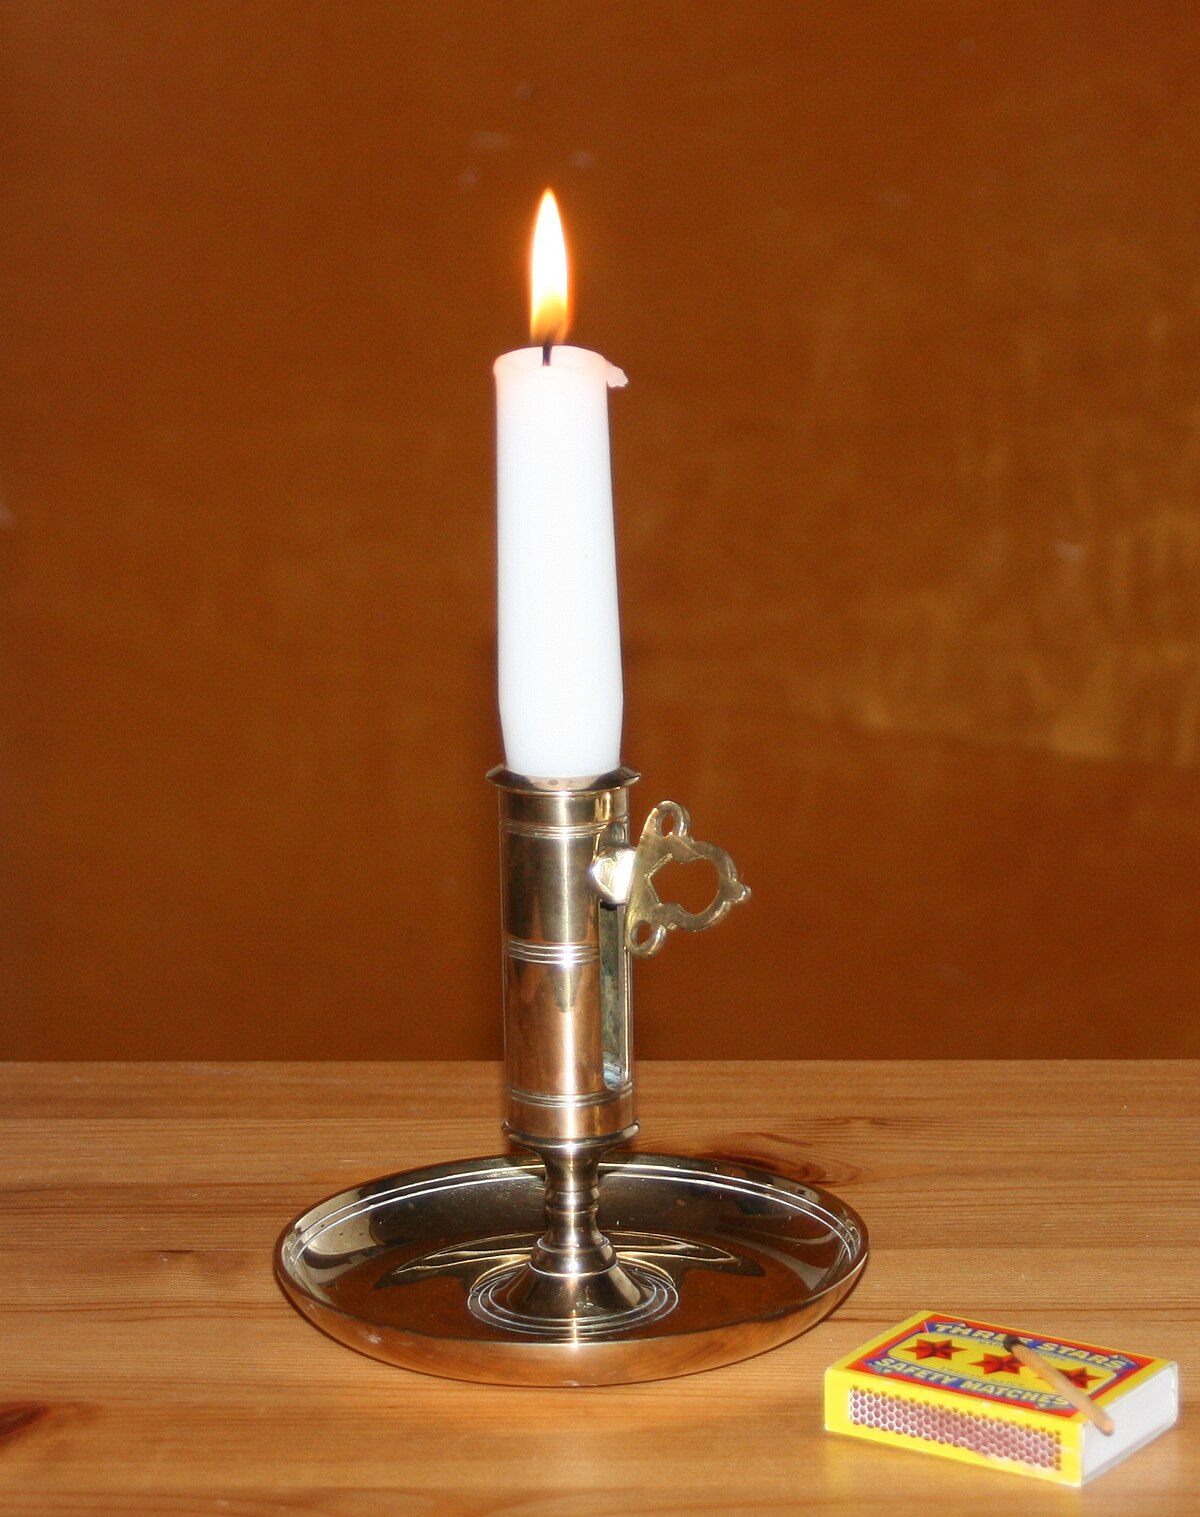 A person holding a small candle in a dark room.